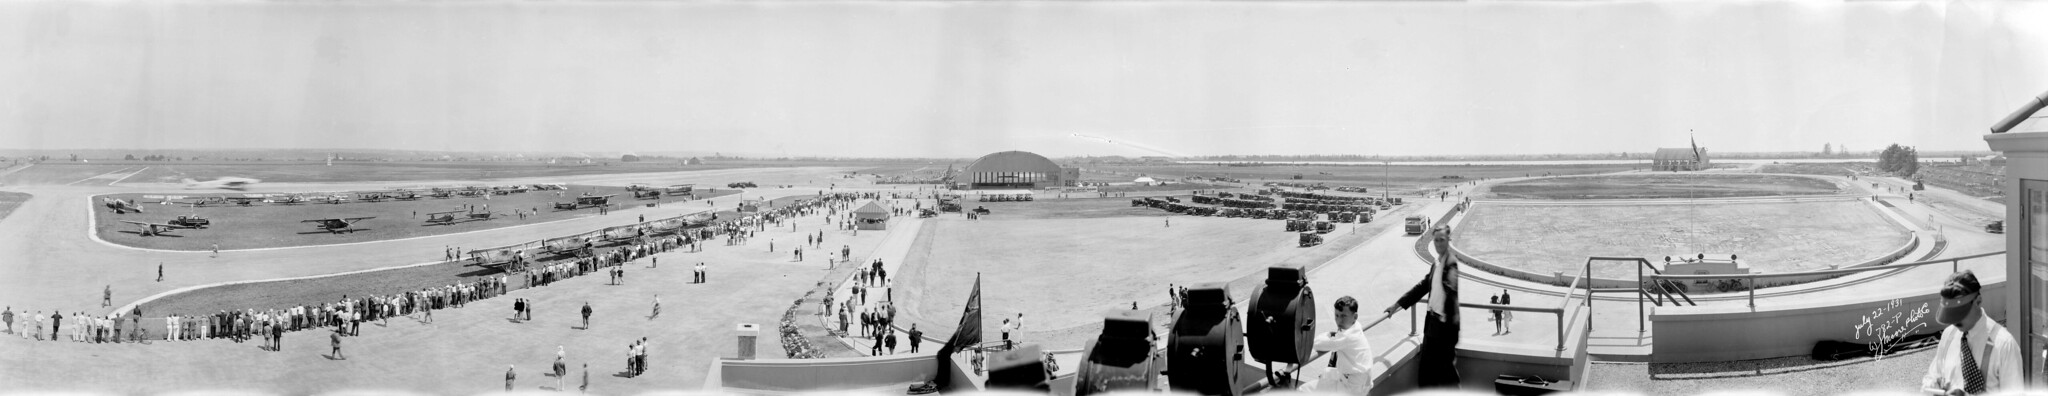 Black-and-white panorama of people lined up along a runway, near several airplanes and a hangar.